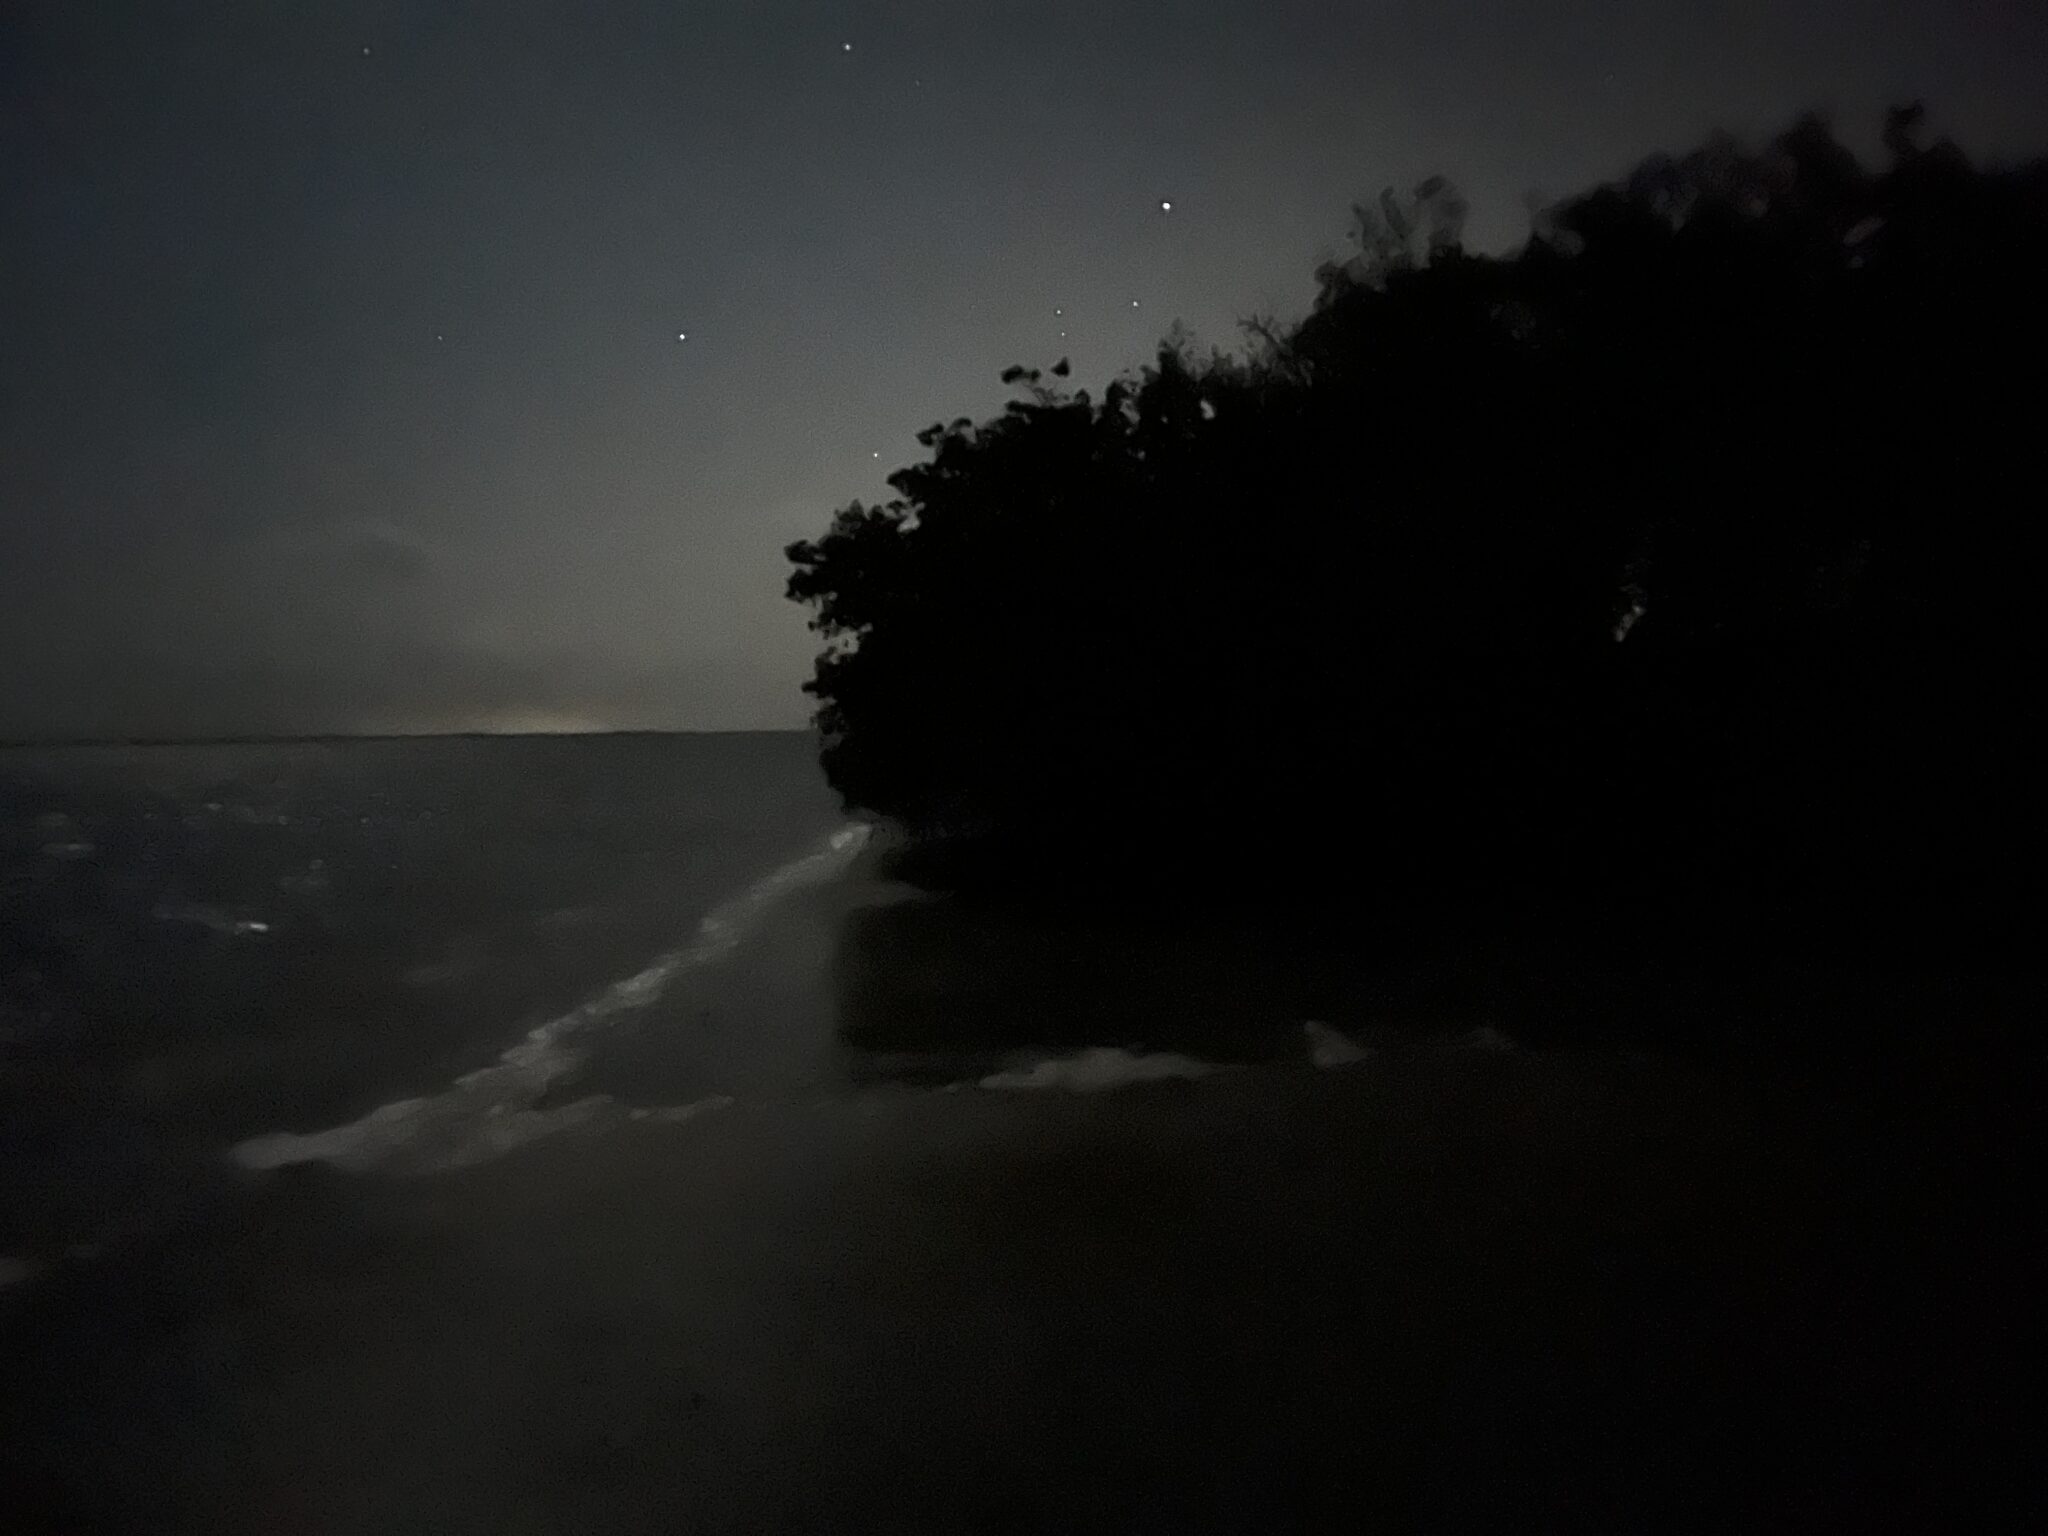 A night scene of the ocean, starry sky, and silhouetted trees.